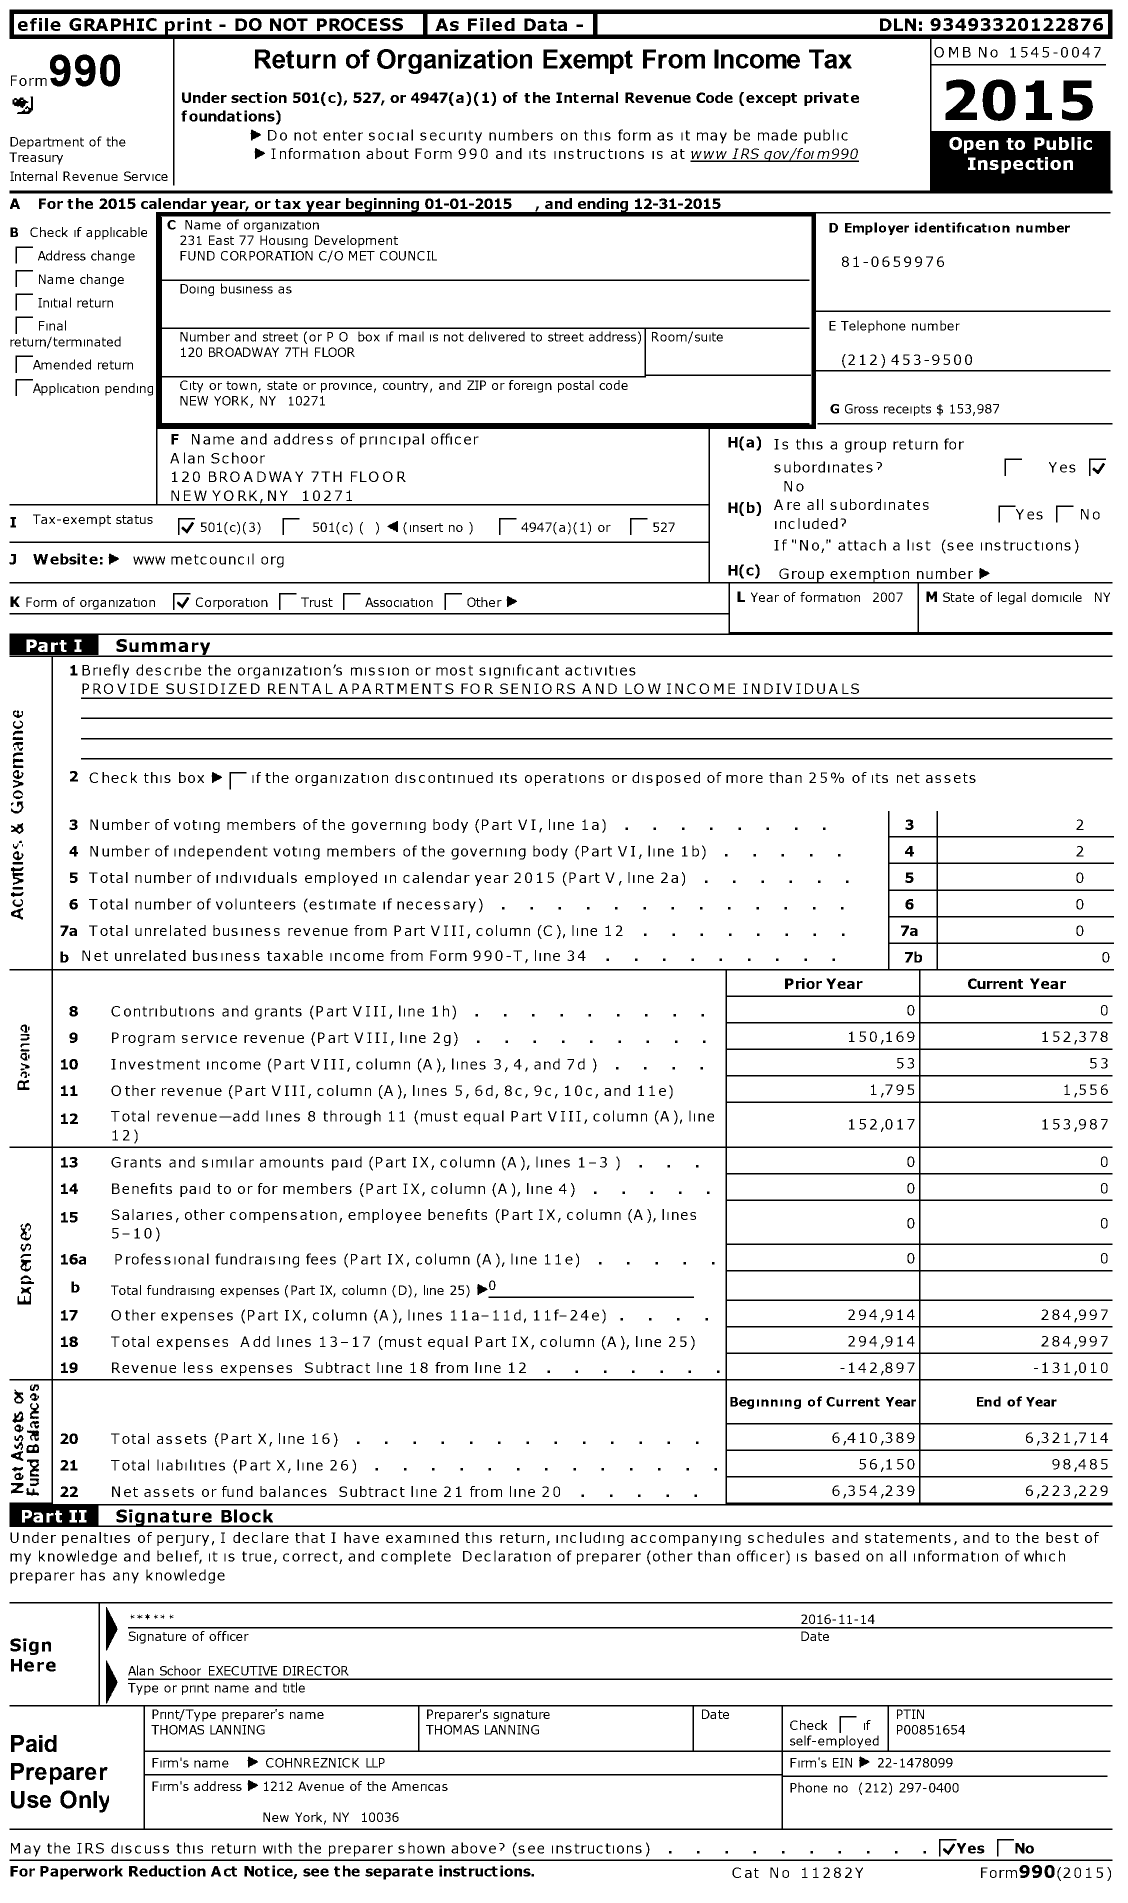 Image of first page of 2015 Form 990 for 231 East 77 Housing Development FUND CORPORATION